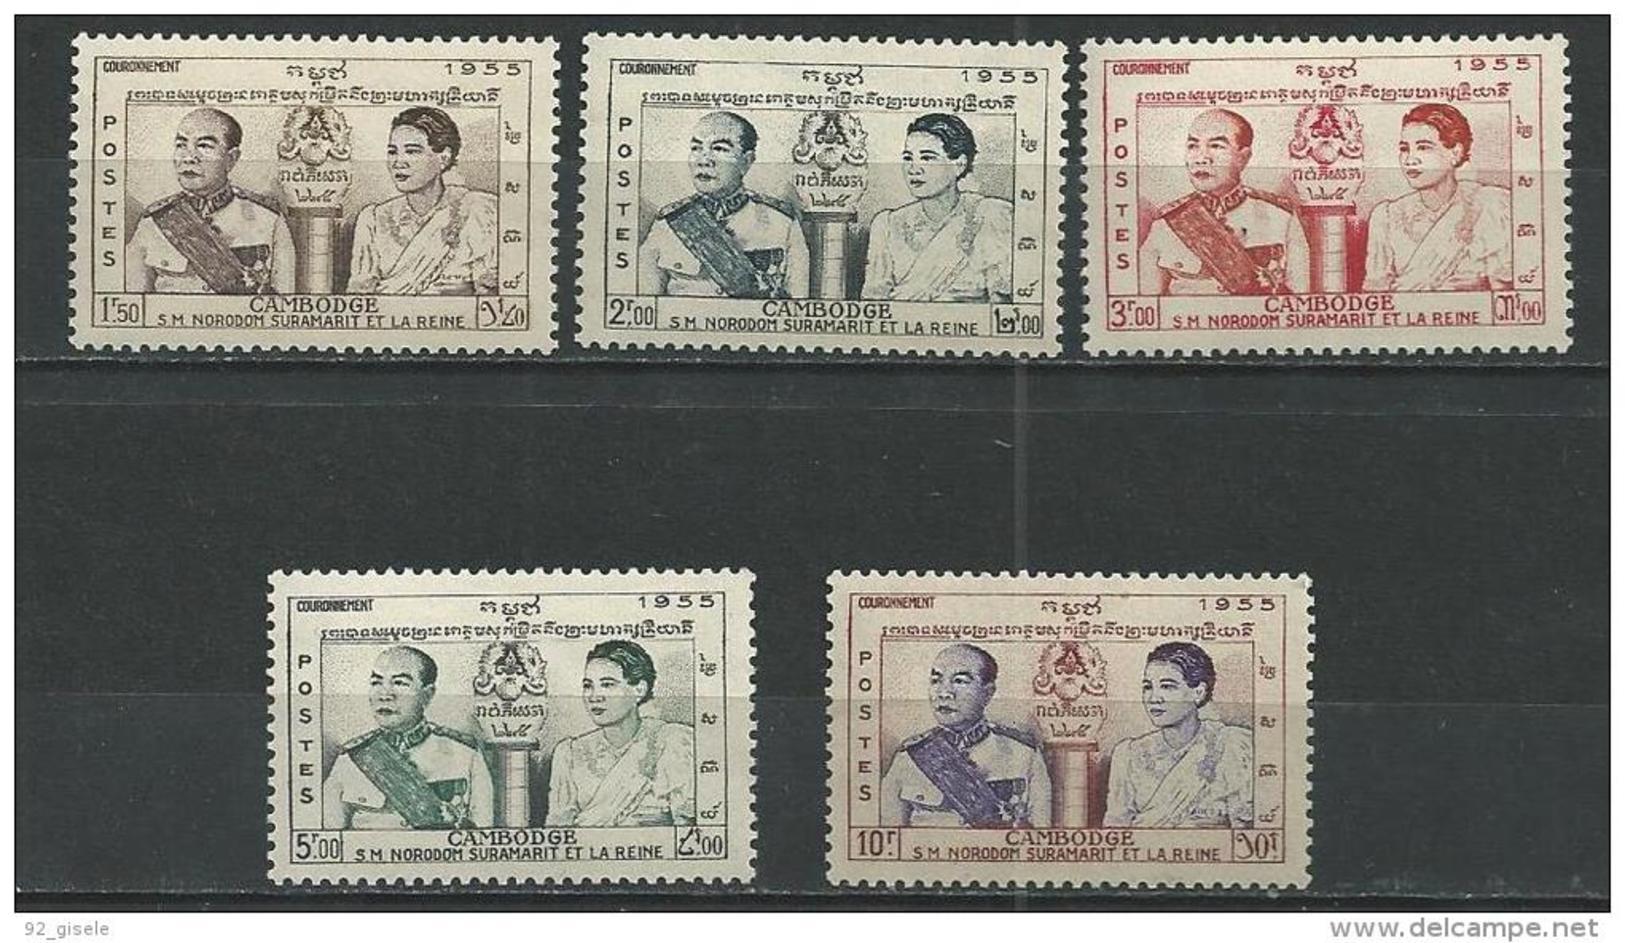 Cambodge YT 52 à 56 " Couronnement " 1955 Neuf* - Cambogia